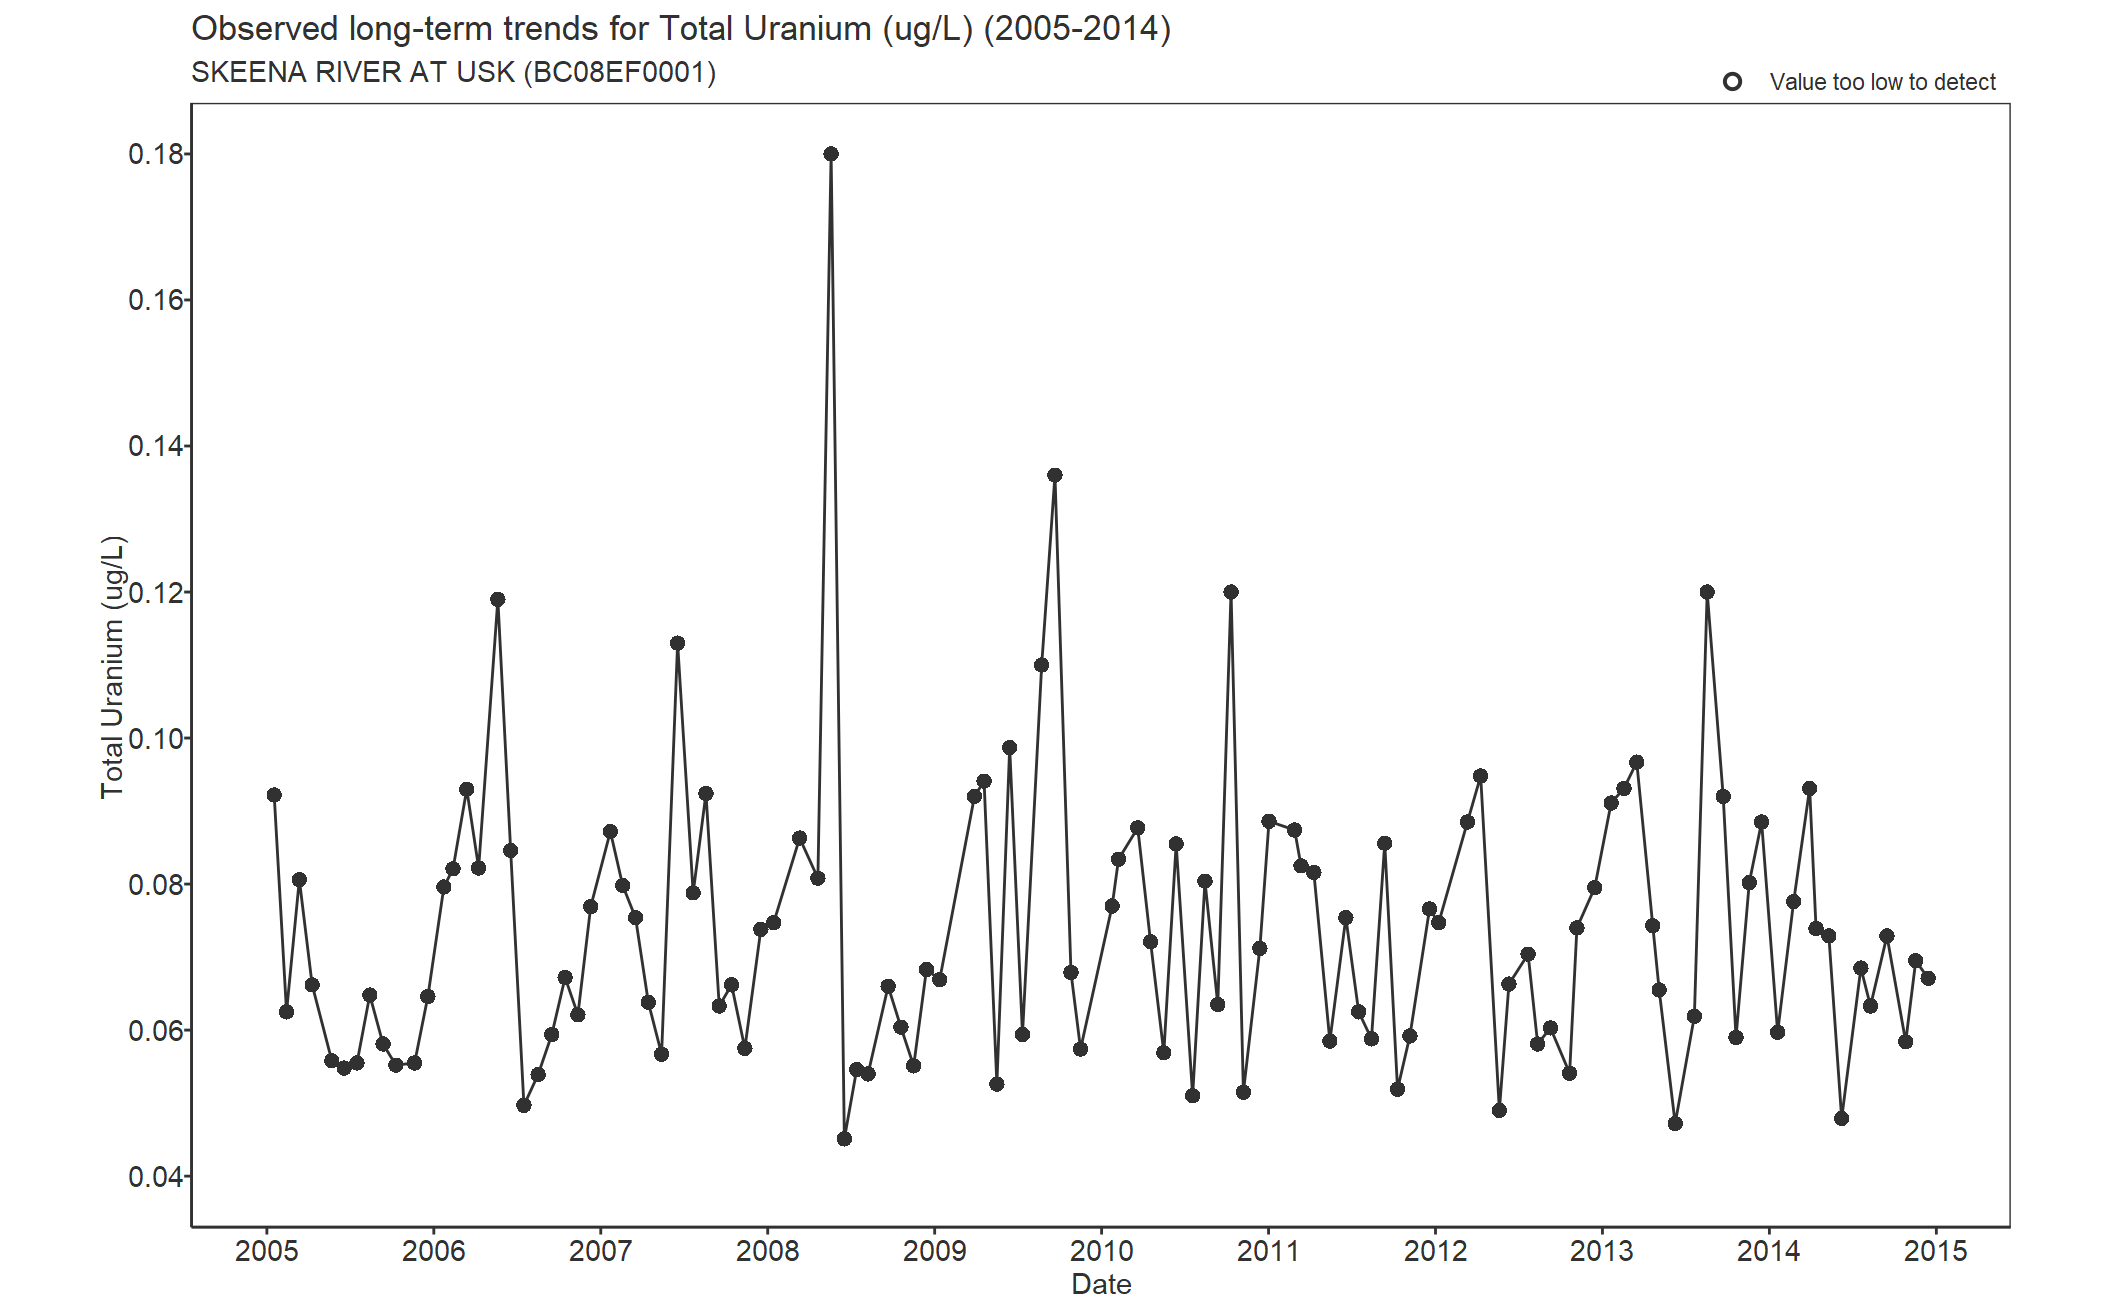 Observed long-term trends for Total Uranium (2005-2014)